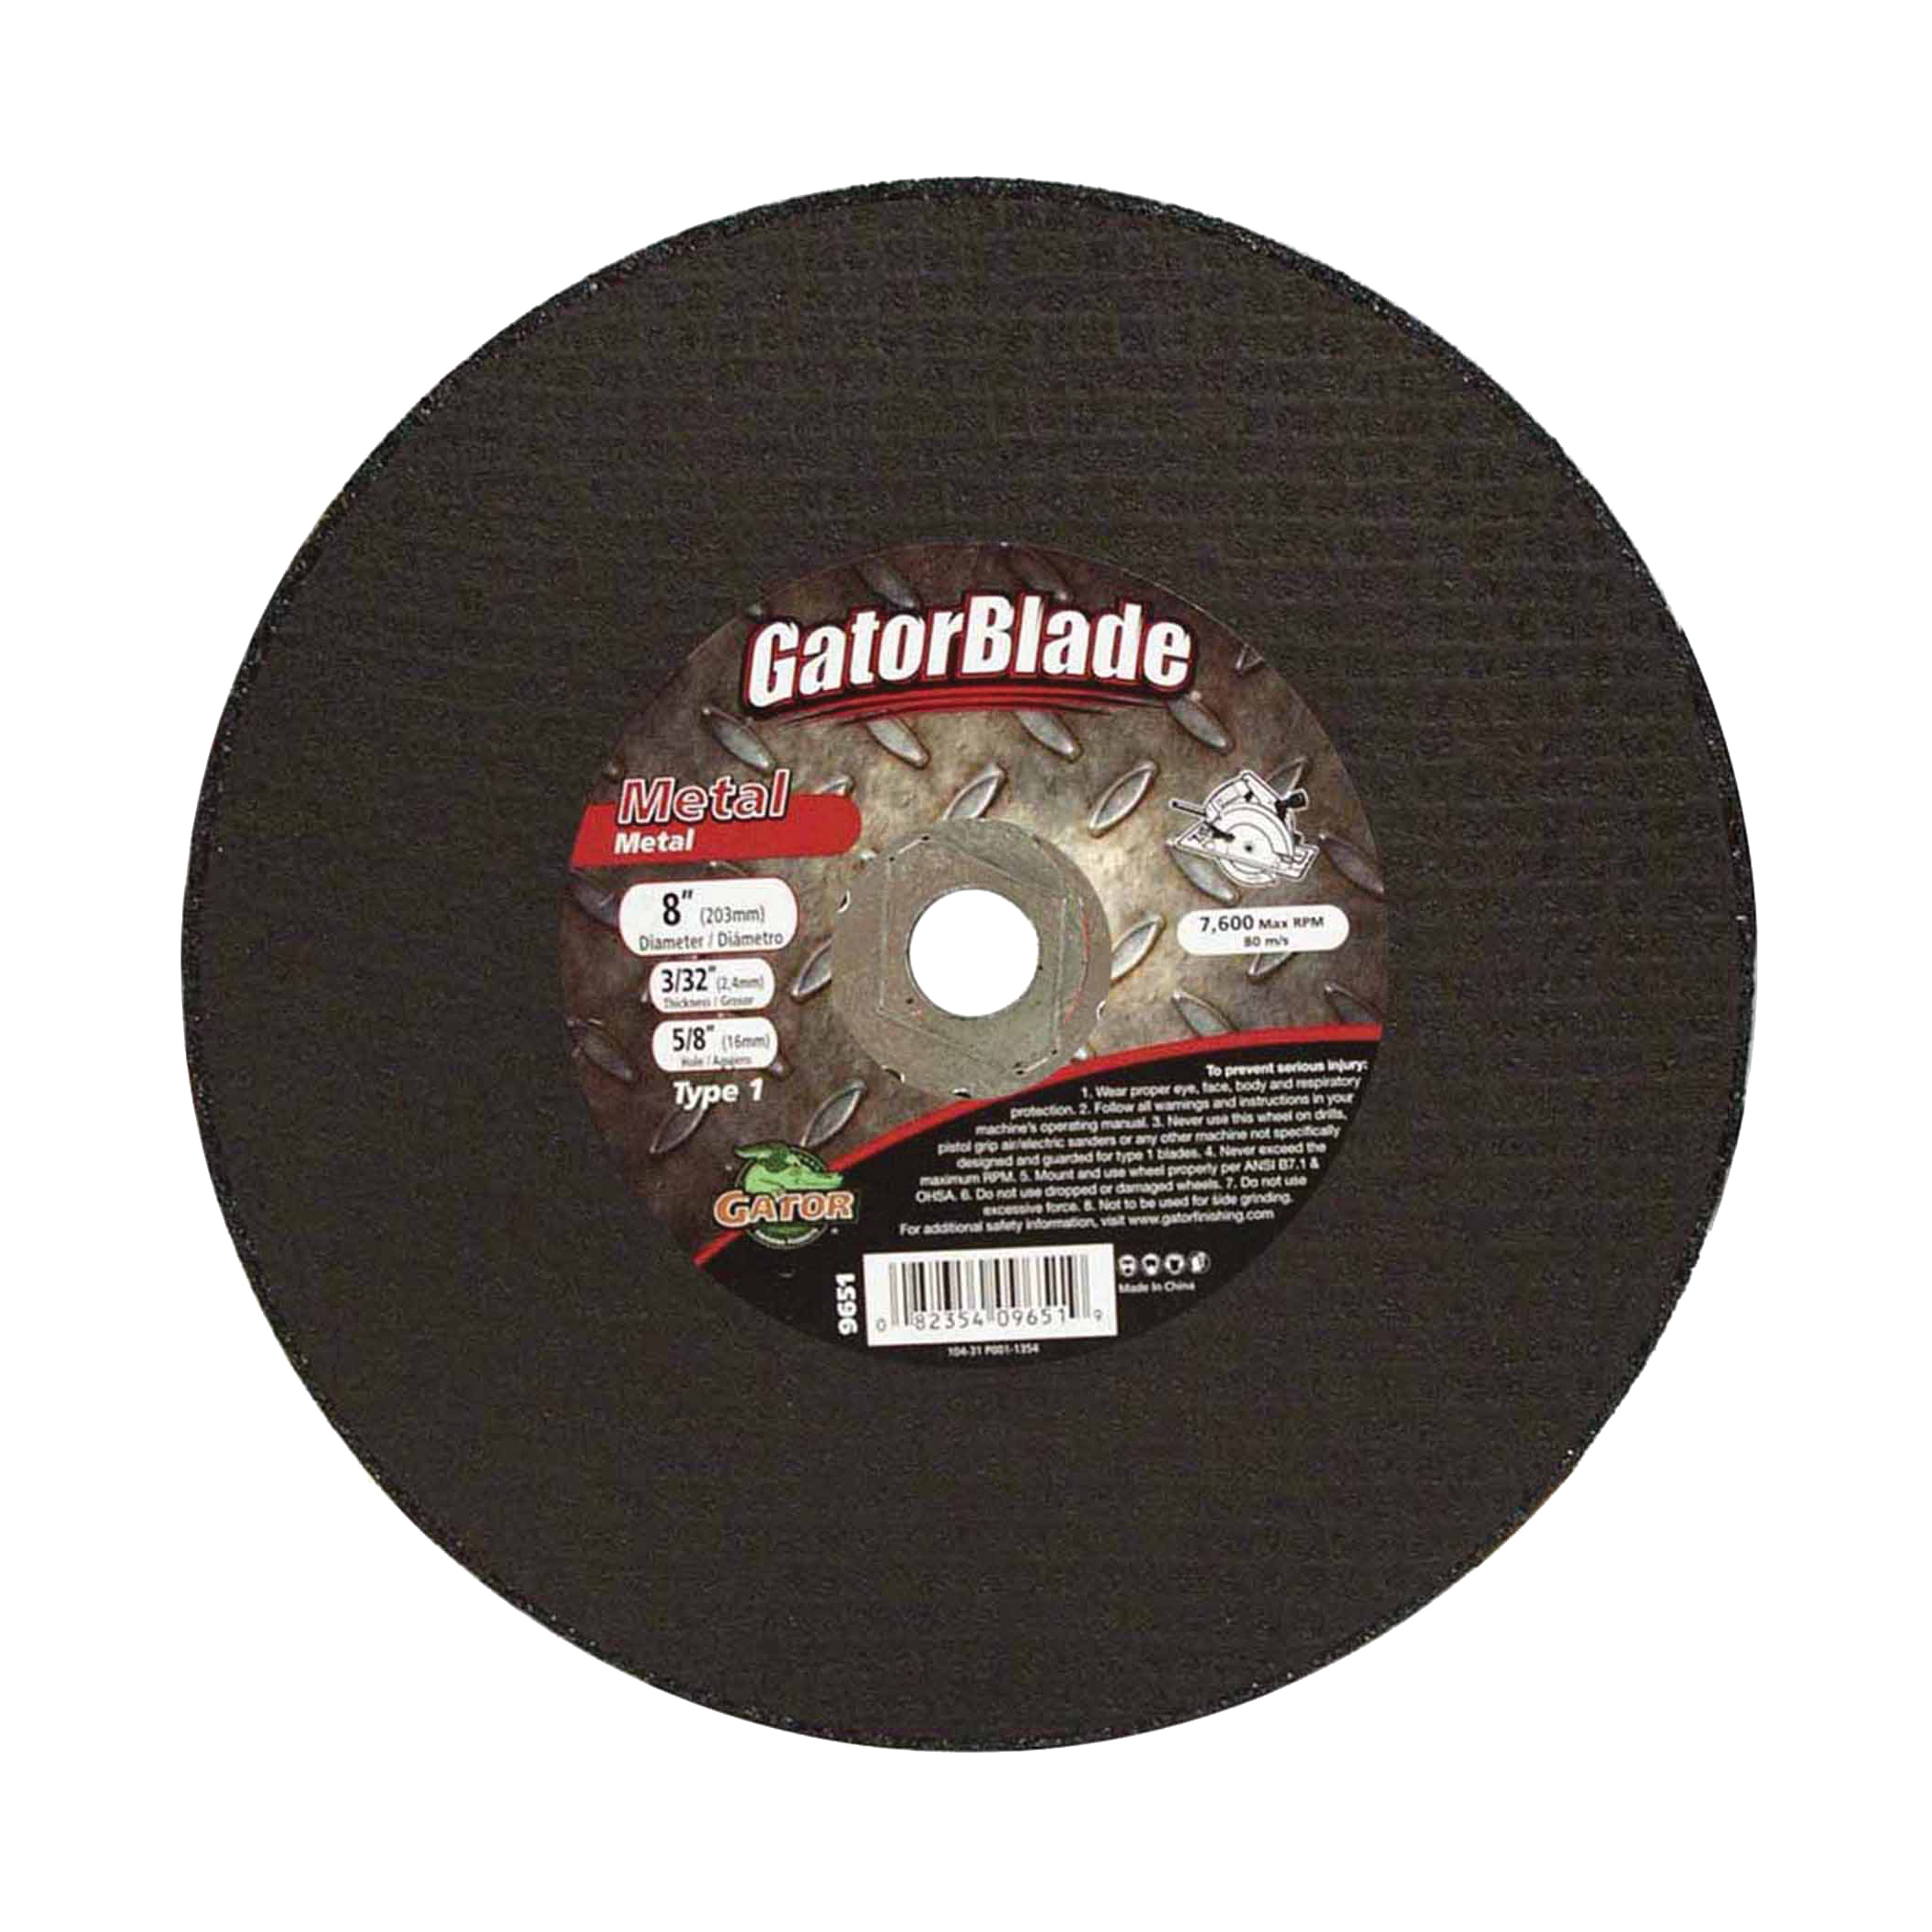 GatorBlade 9651 Cut-Off Wheel, 8 in Dia, 3/32 in Thick, 5/8 in Arbor